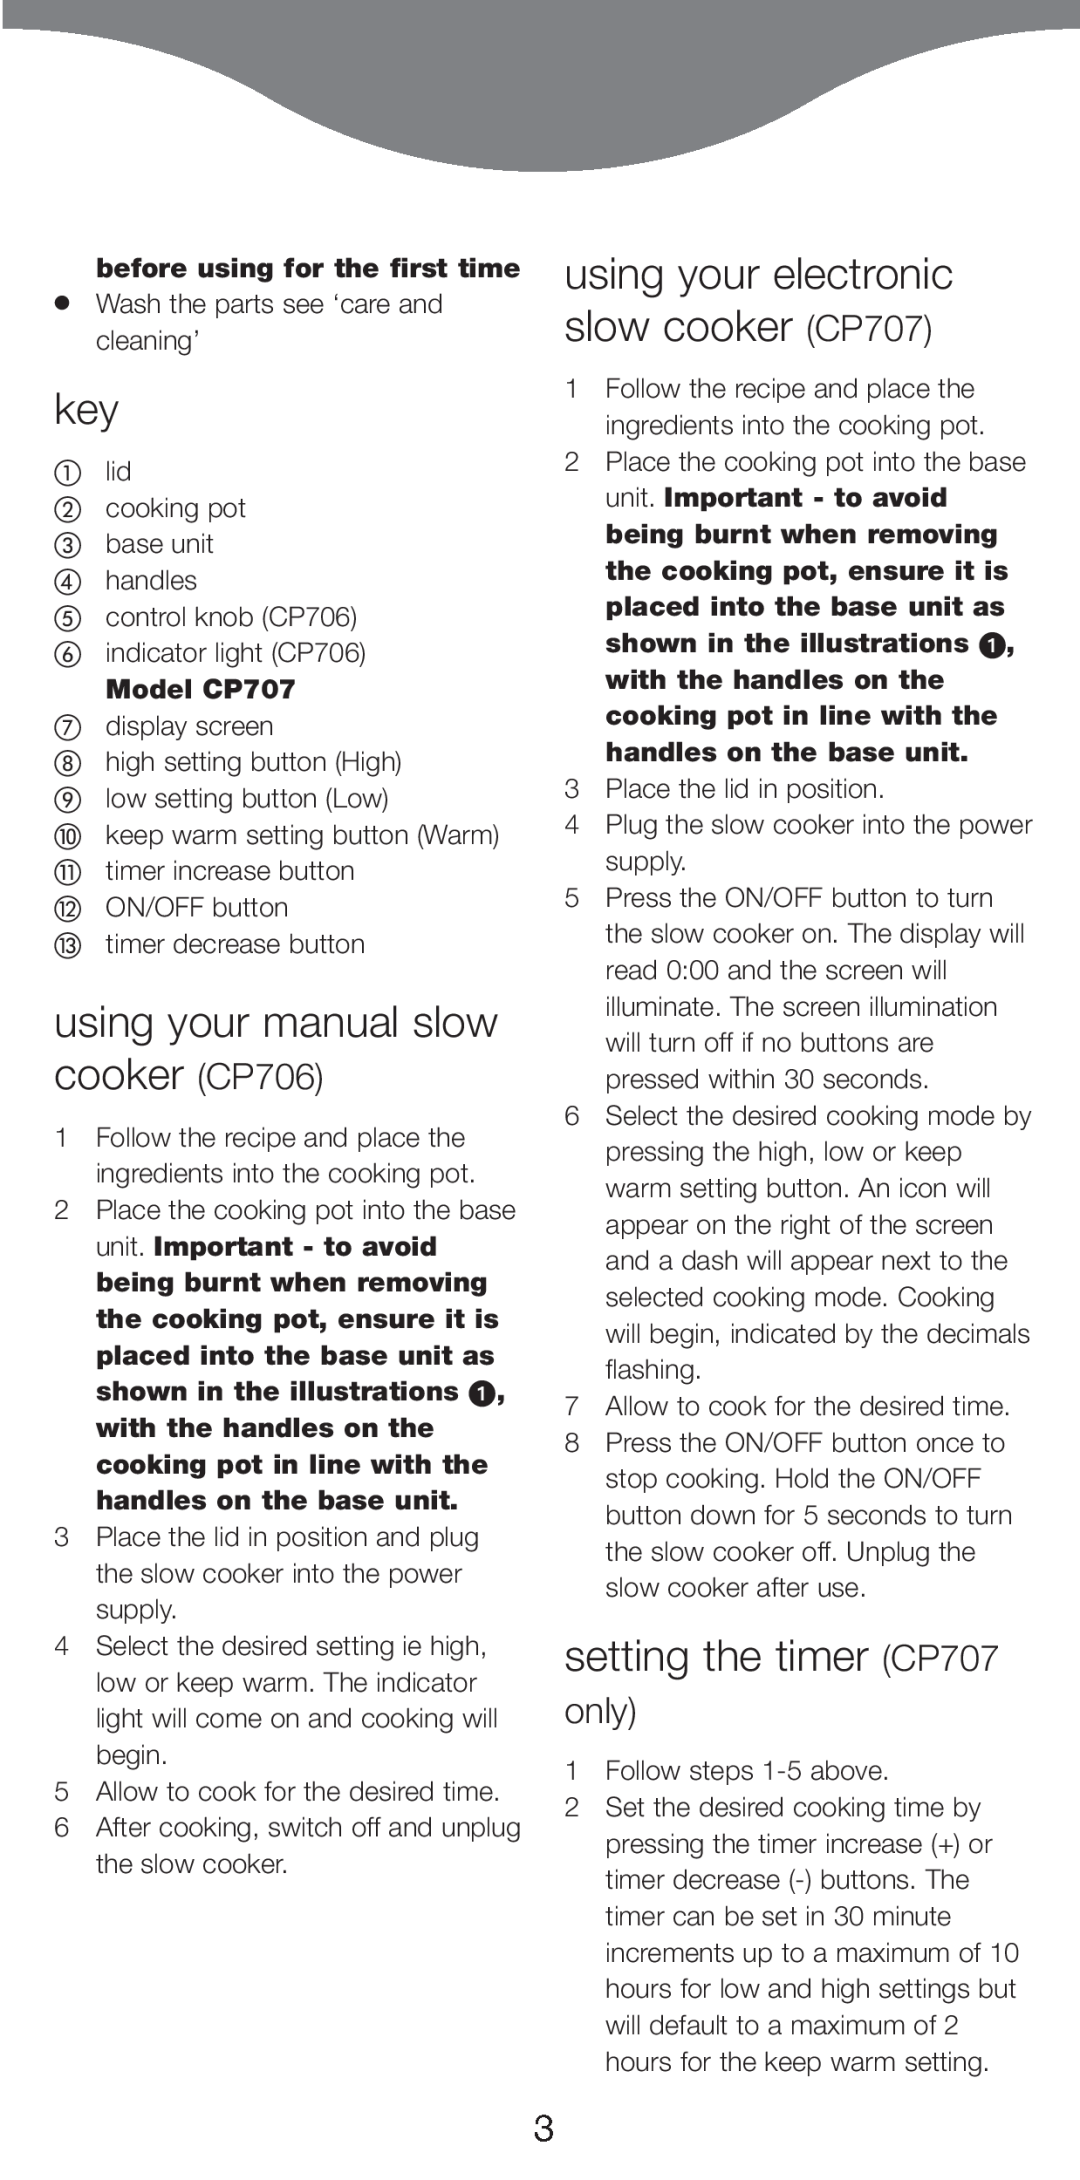 Kenwood using your manual slow cooker CP706, using your electronic slow cooker CP707, setting the timer CP707 